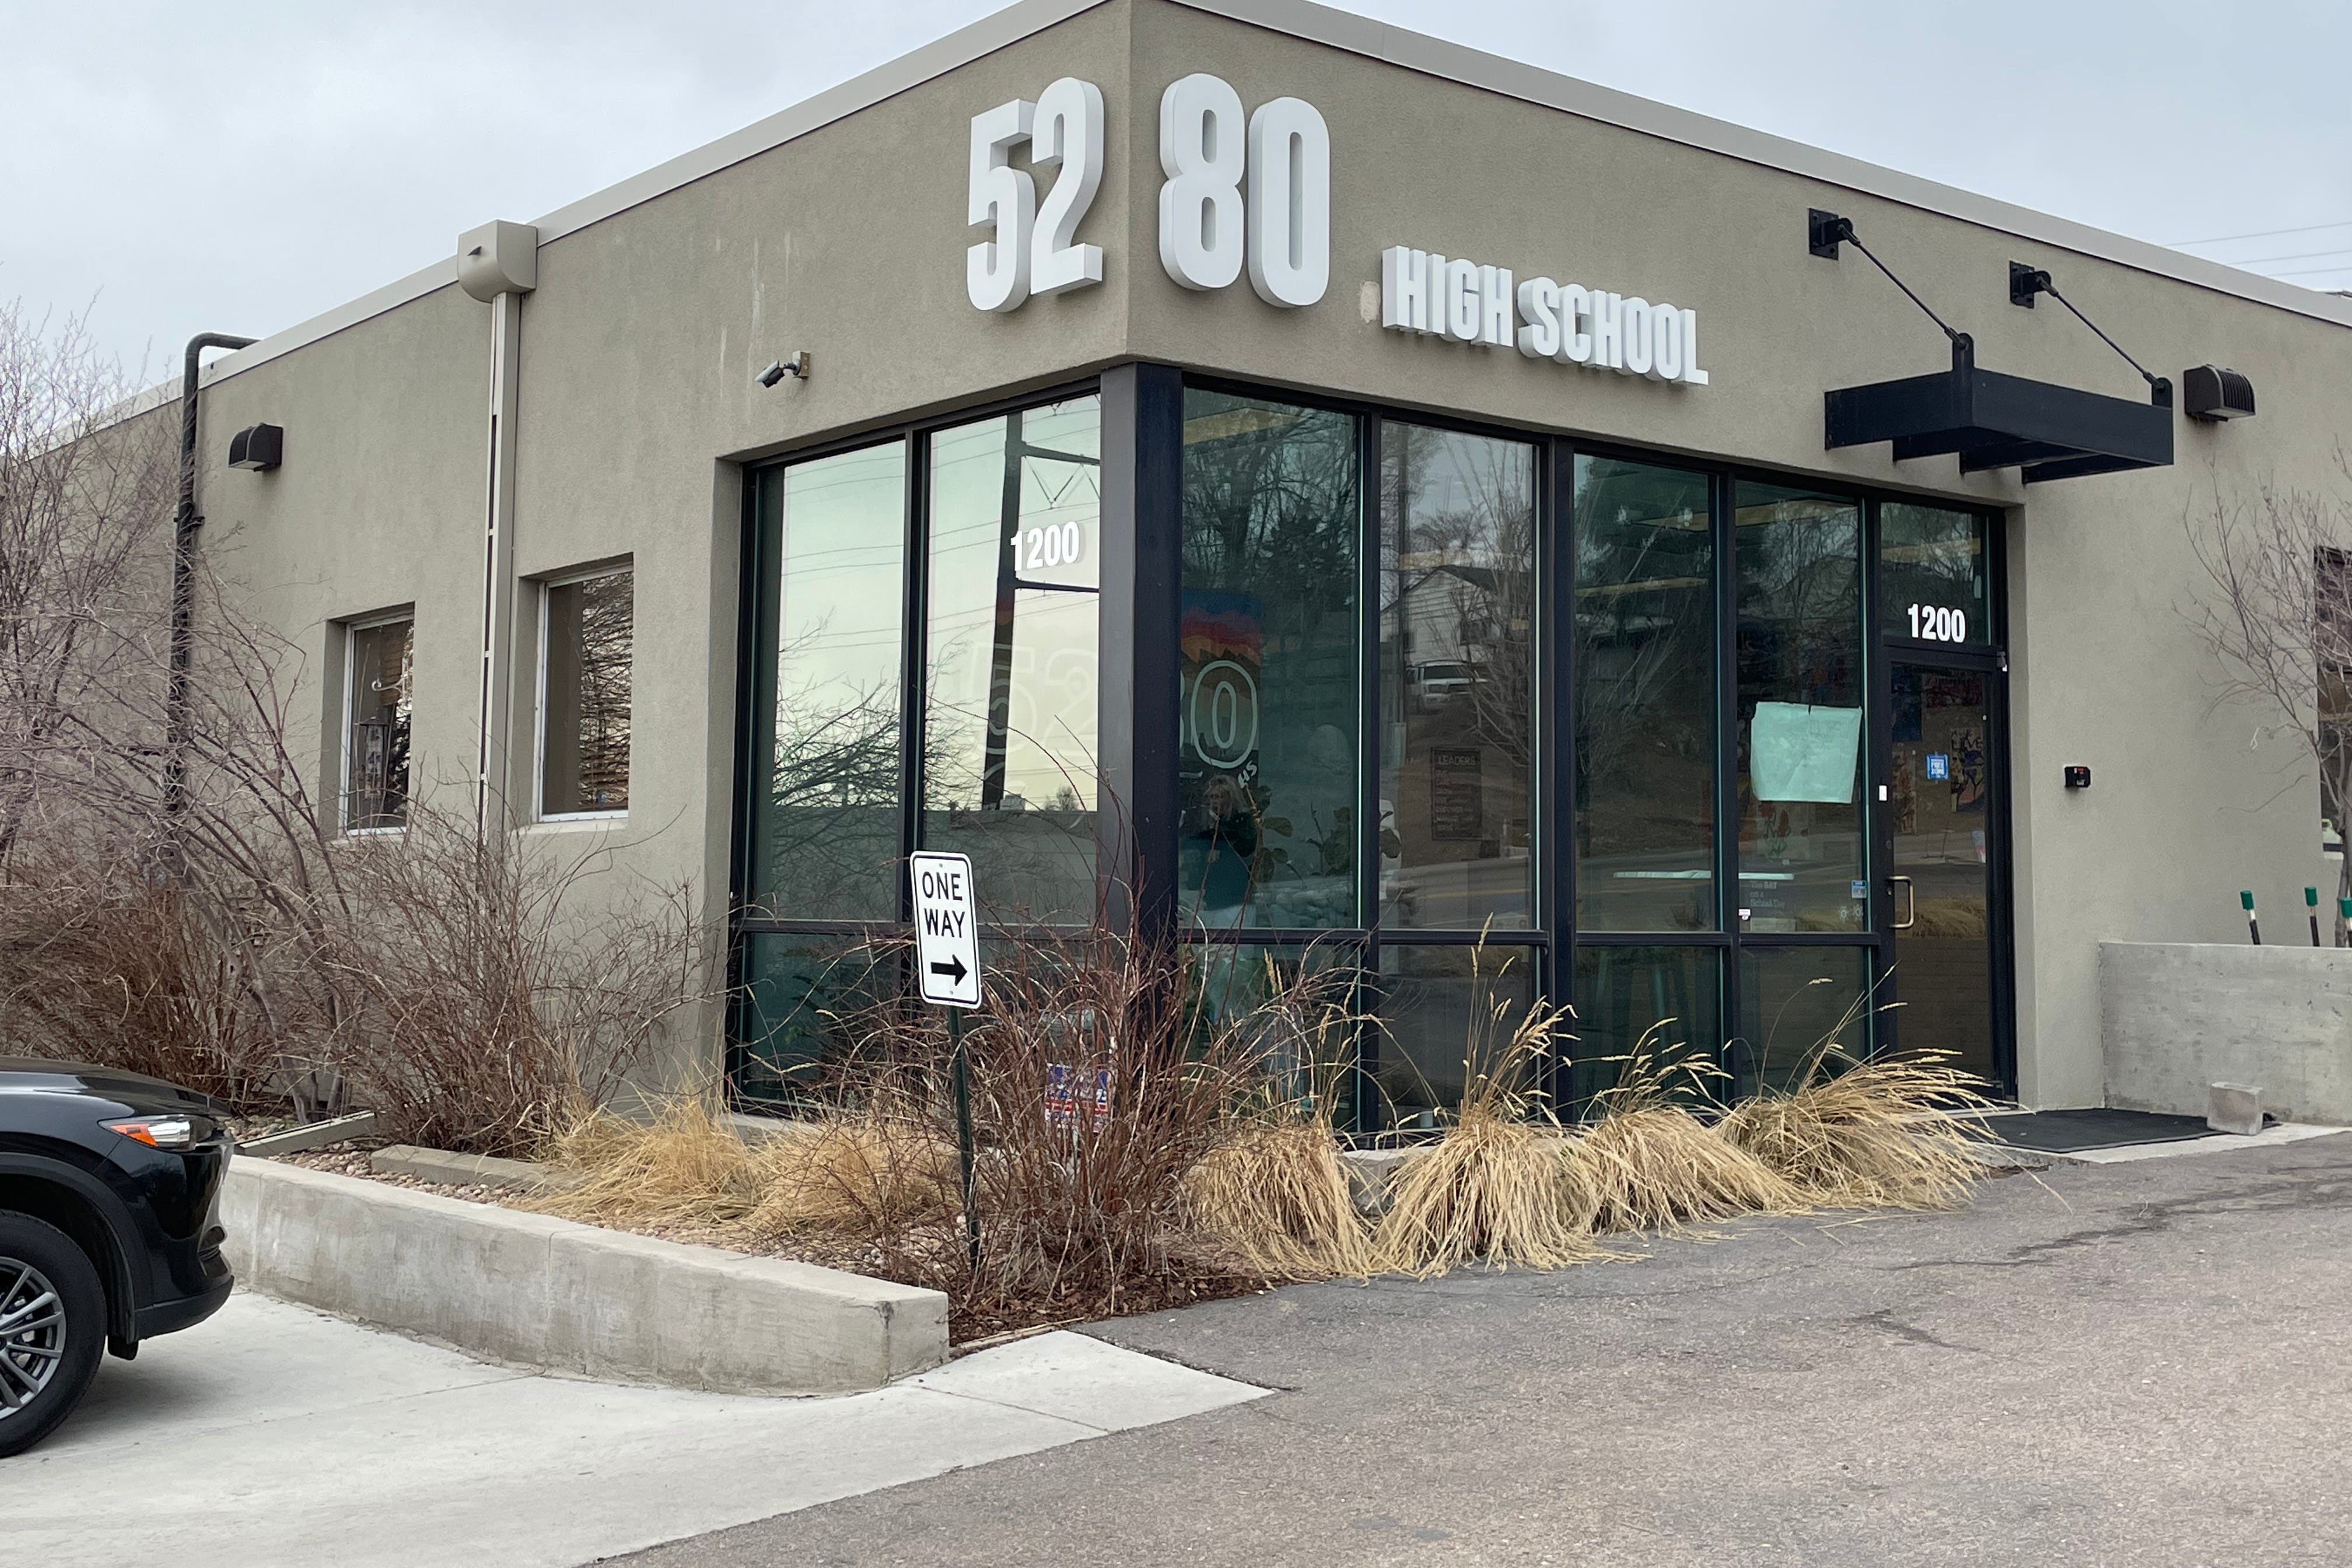 Photo shows the 5280 charter school from a corner angle. It appears to be a gray block building with a large glass window. Large numerals 52 are one side and 80 on the other.